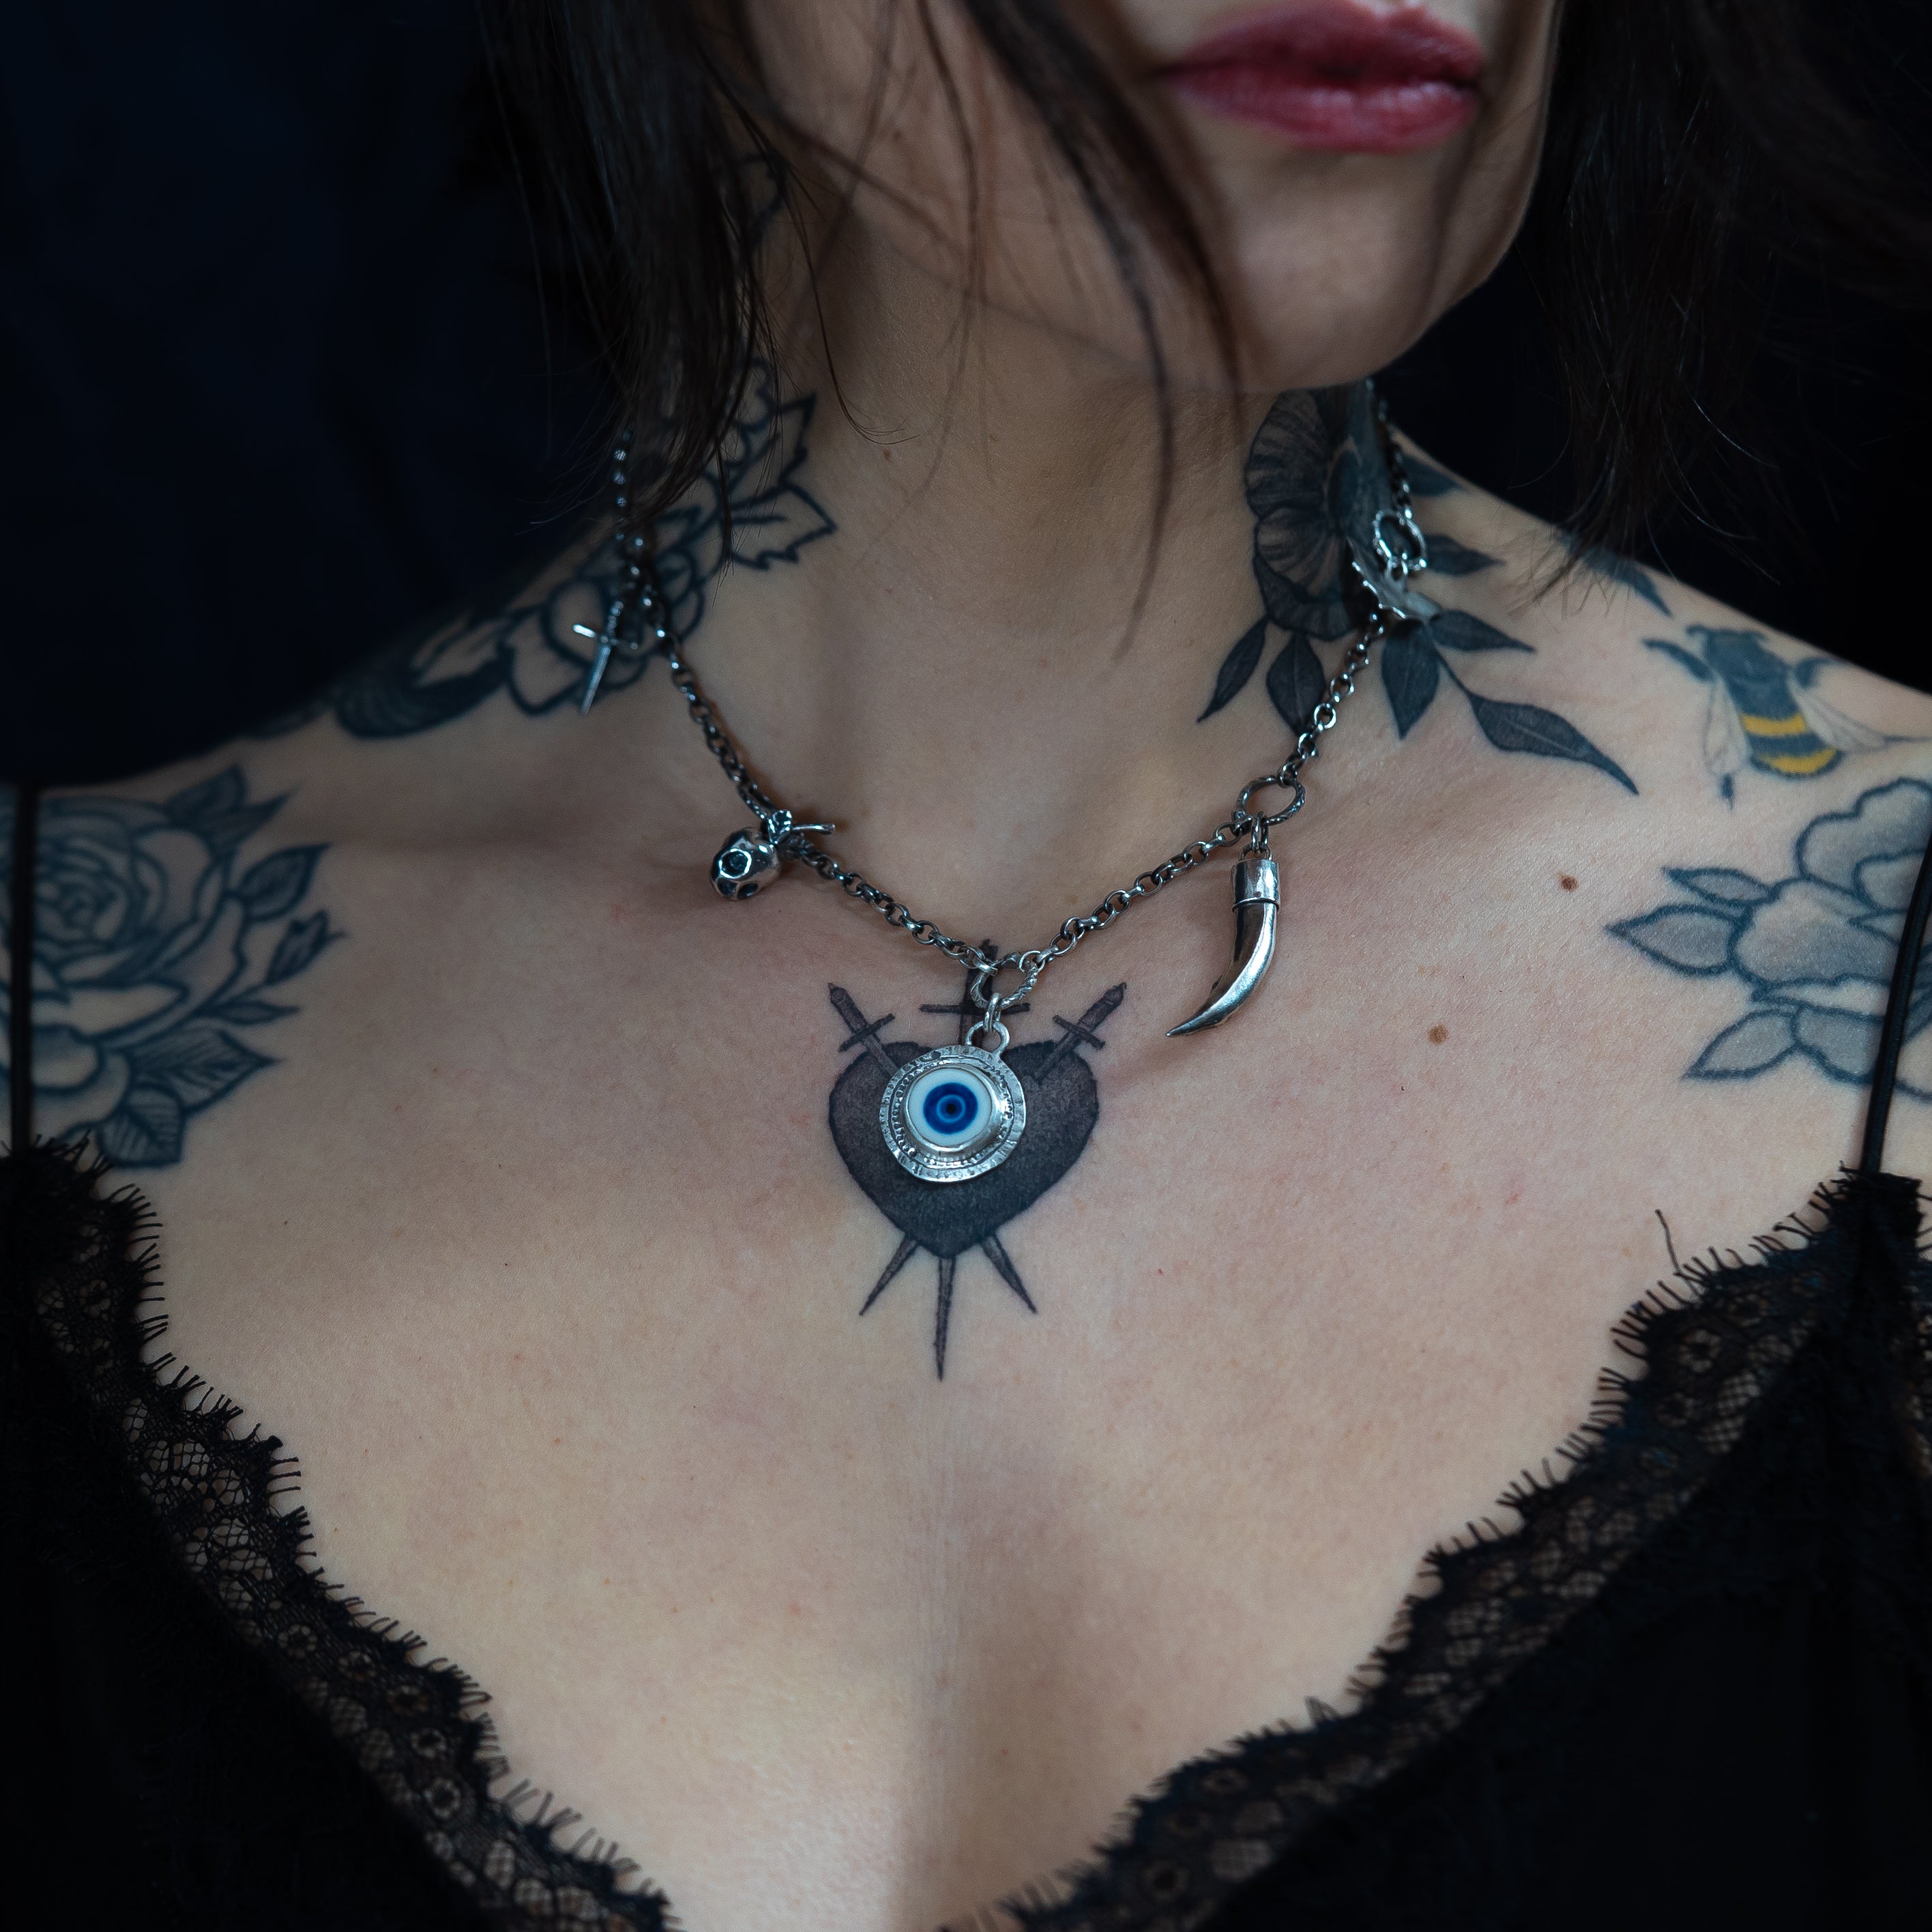 gothic charm necklace in silver, made by hand in the UK, worn by a tattooed model on a black background